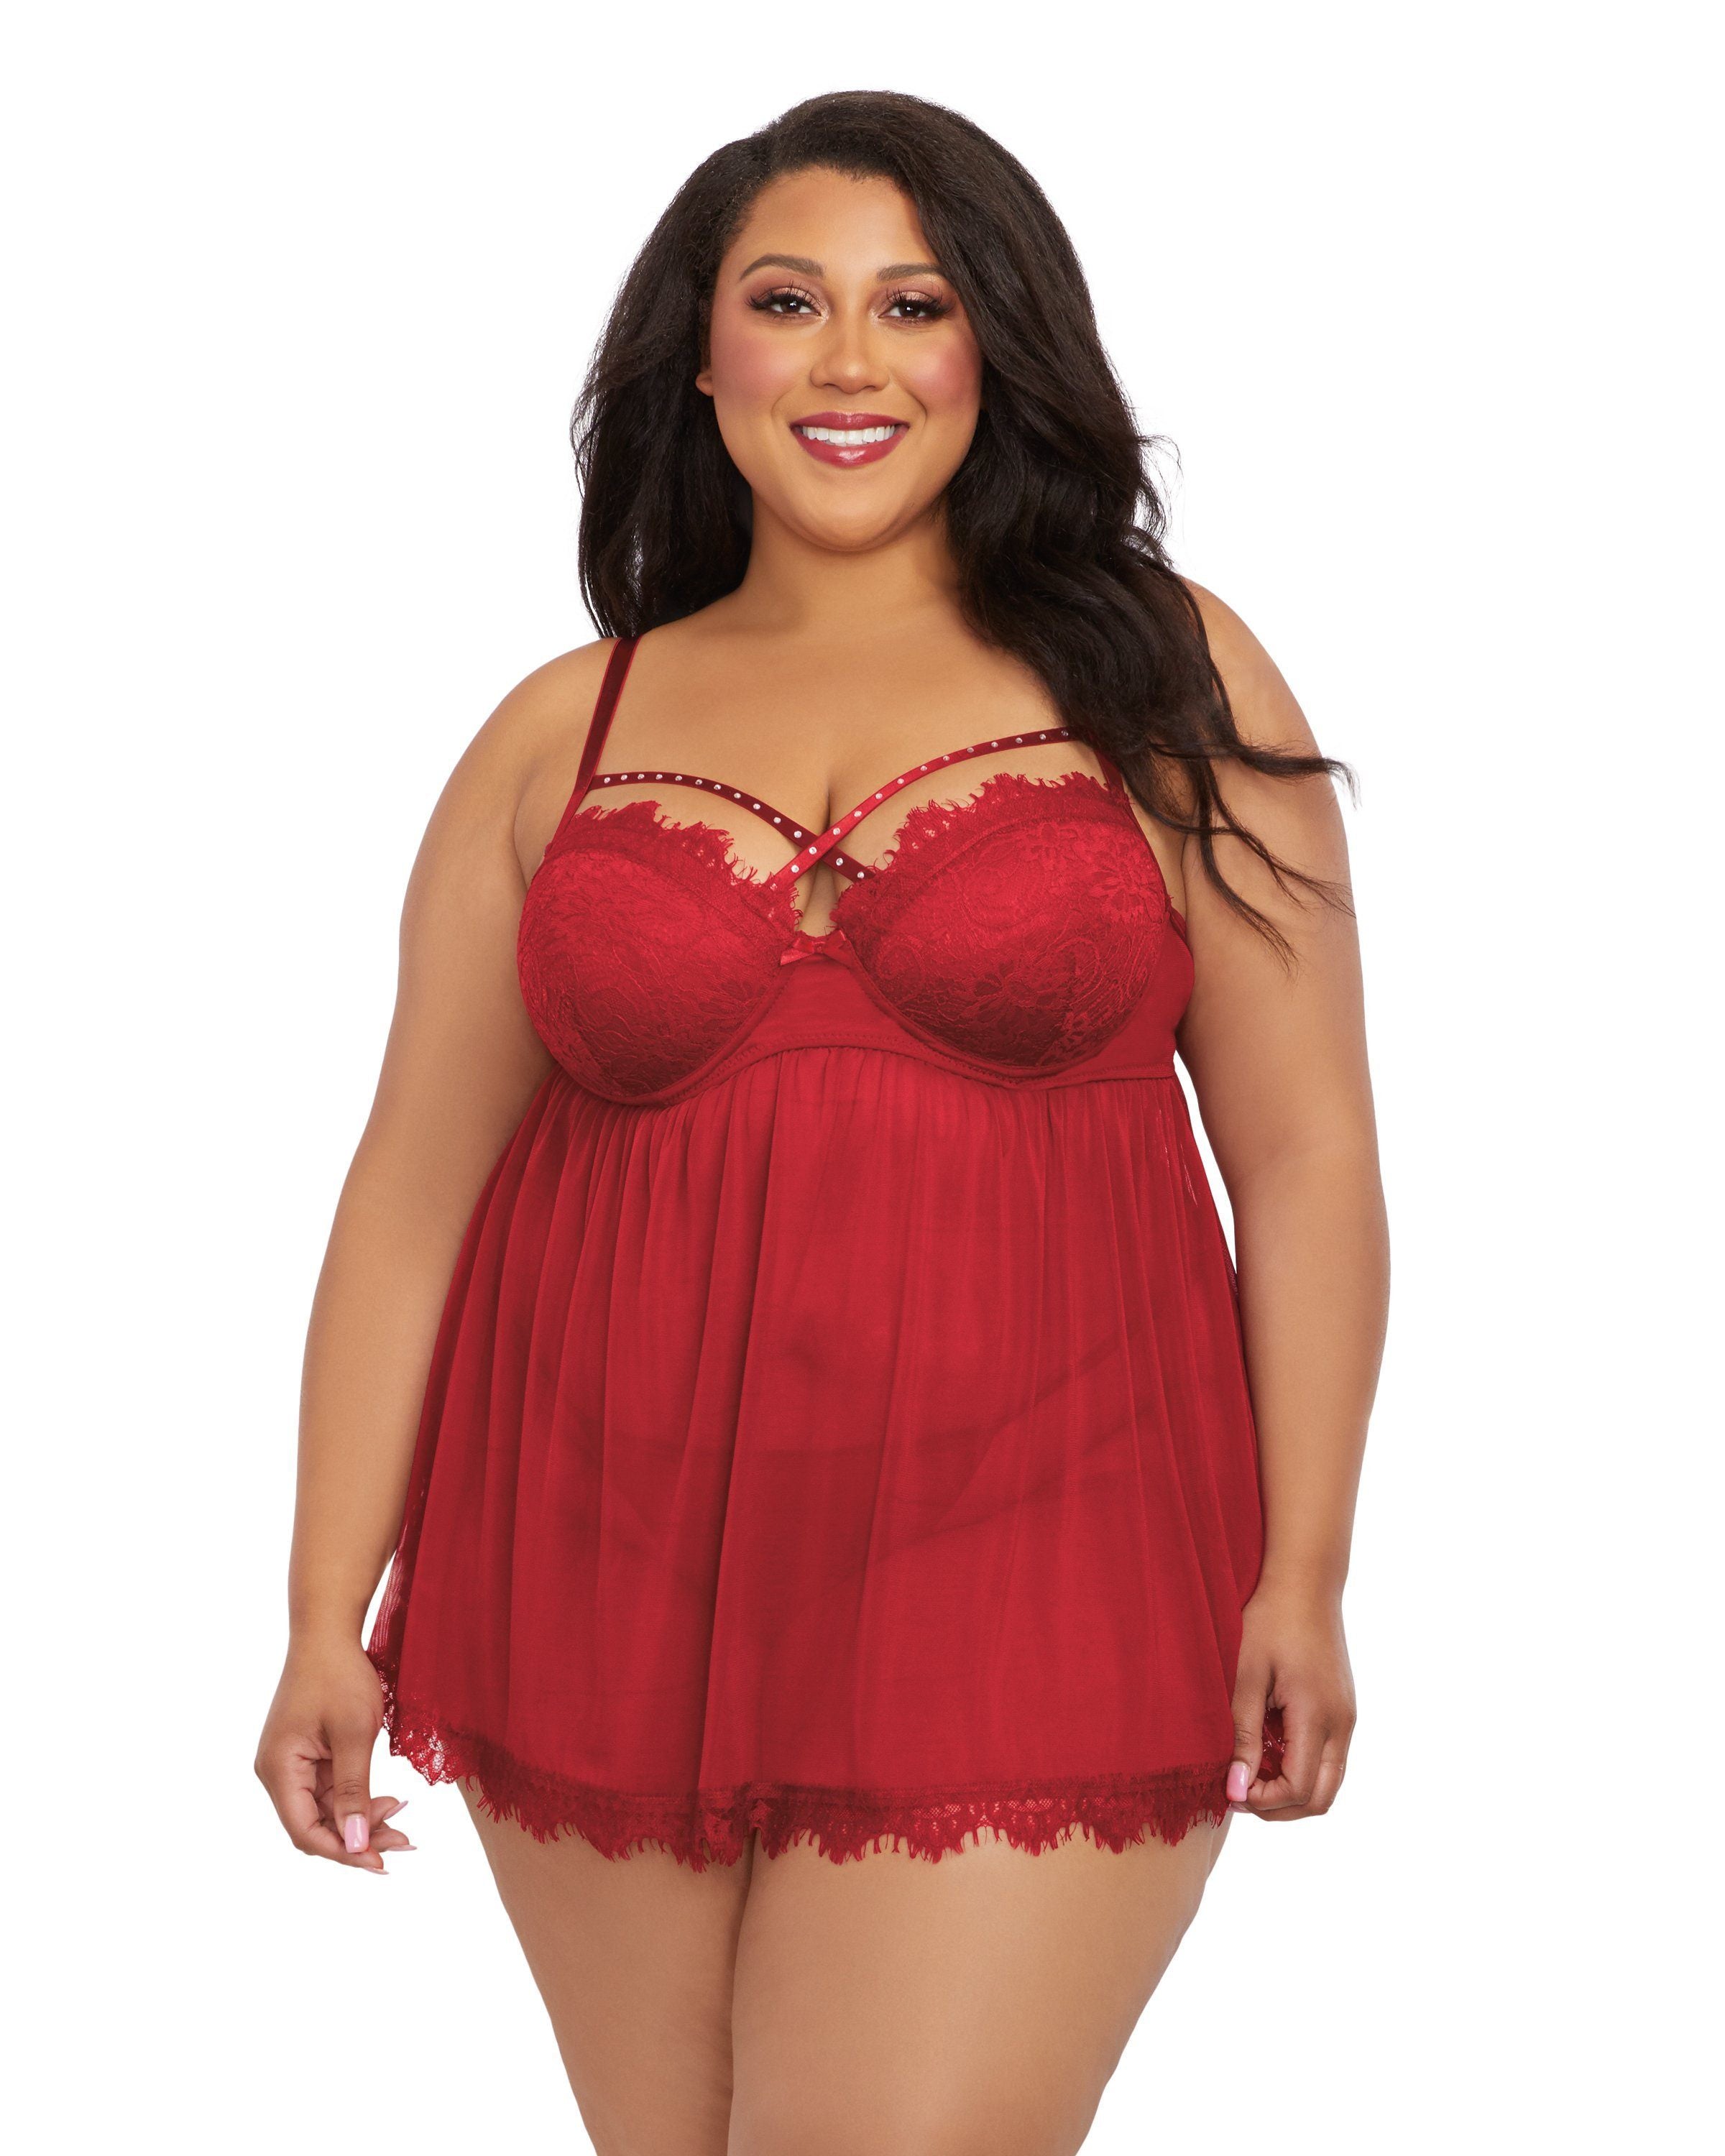 Dreamgirl Plus Size Underwire Push Up Cup Babydoll with Stretch Mesh S